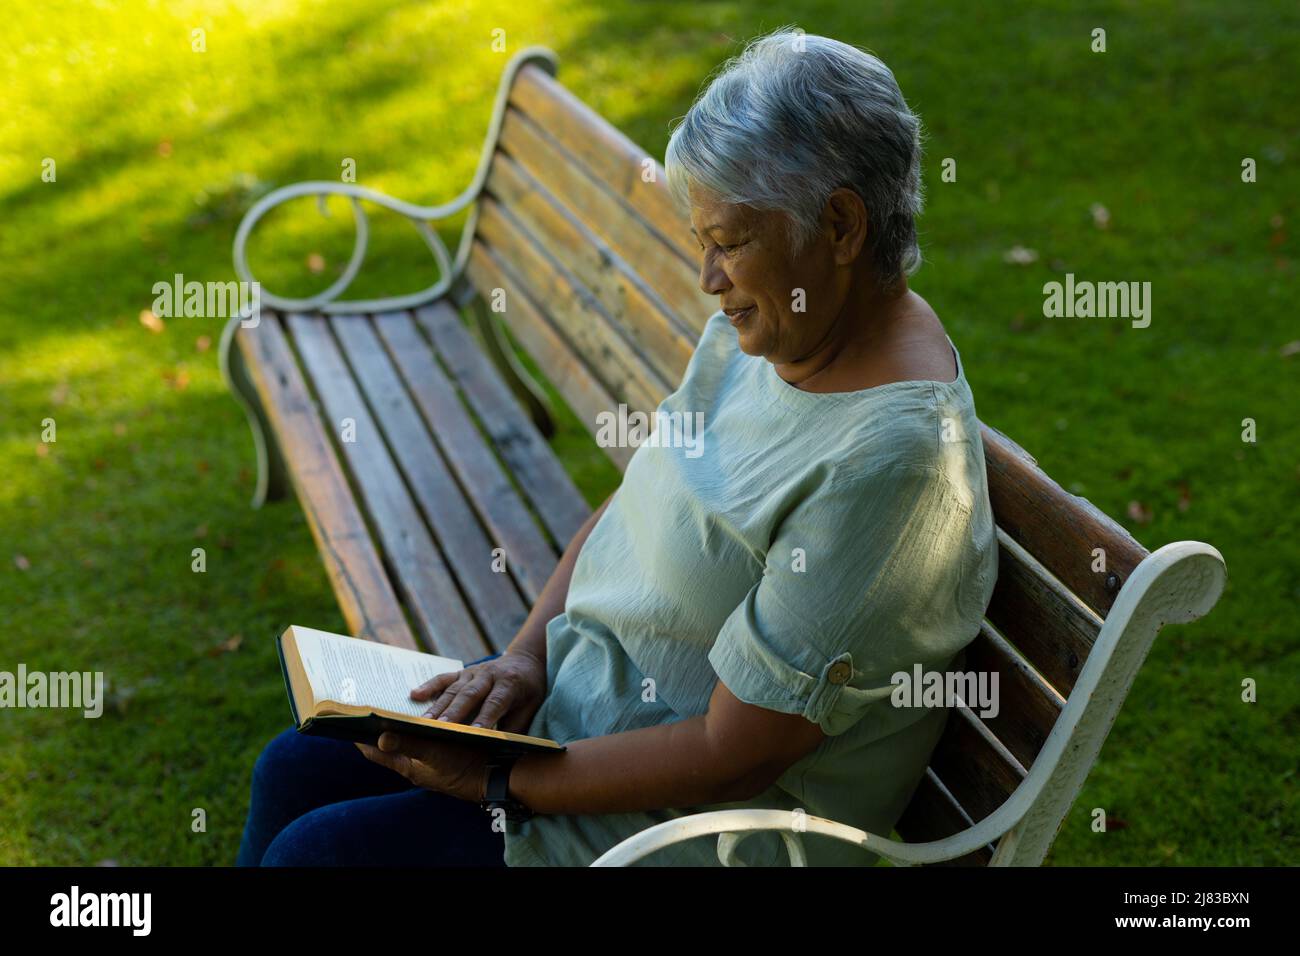 Side view of smiling biracial senior woman with short hair reading book on bench in park Stock Photo